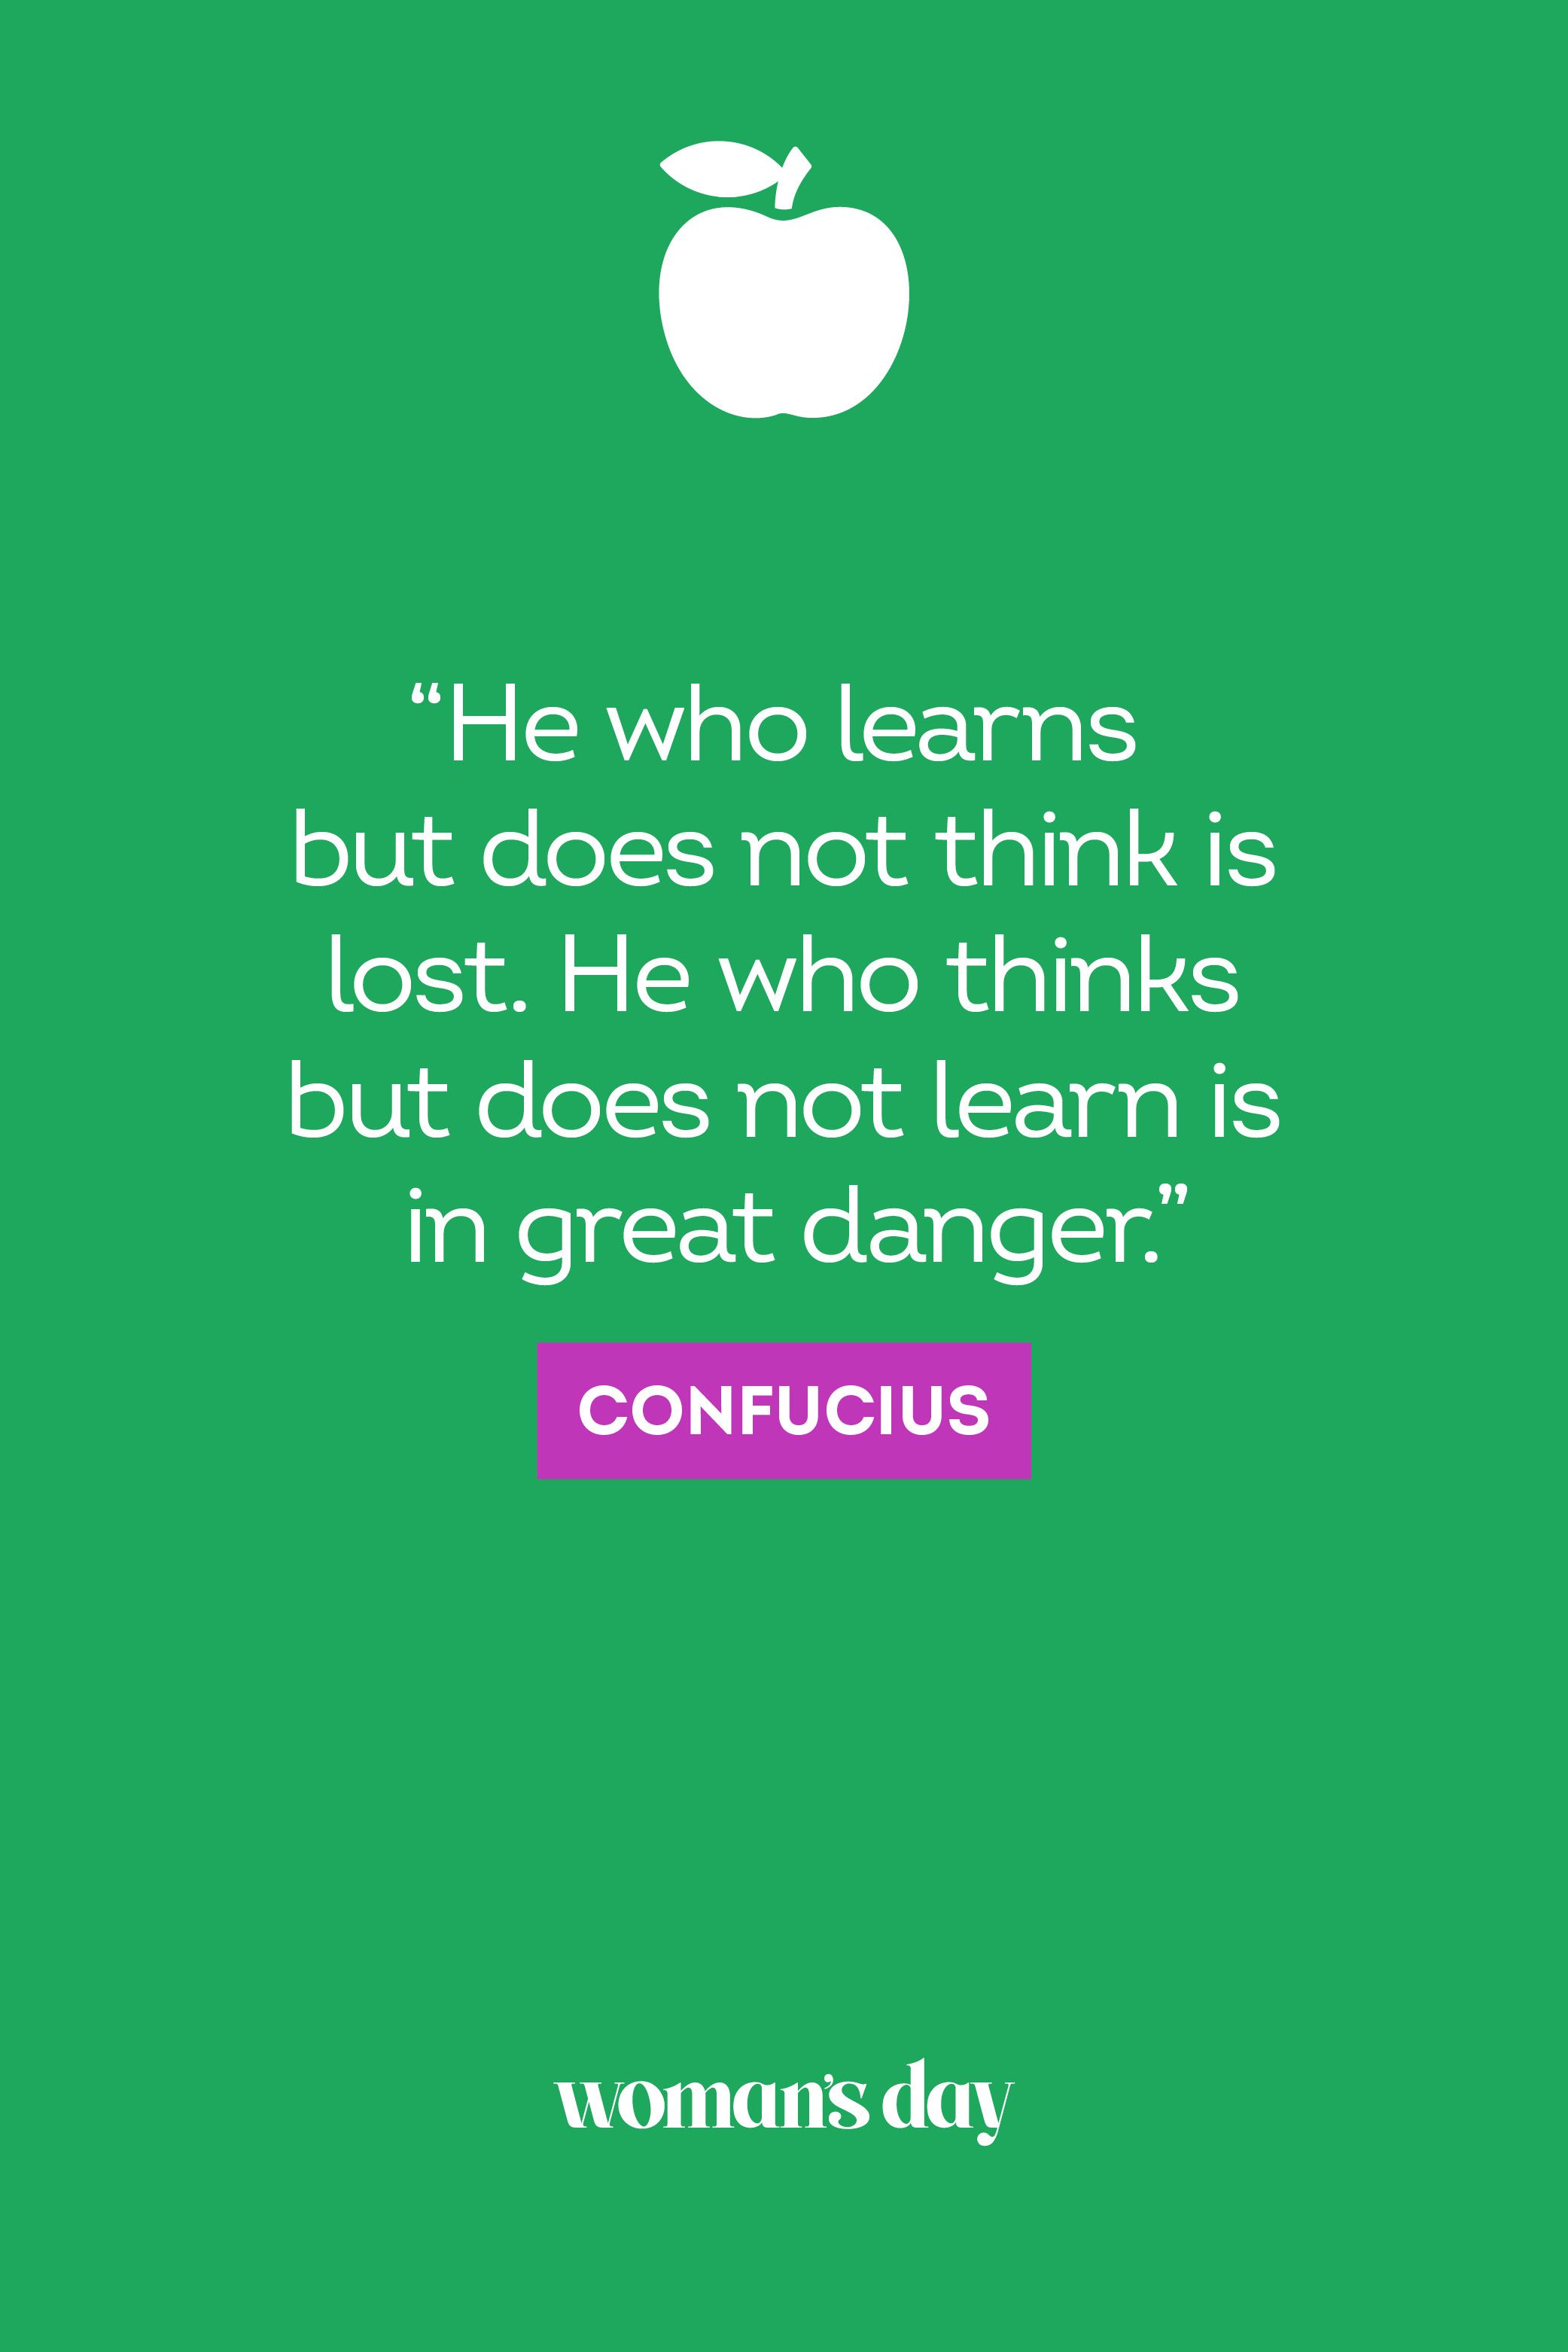 education quotes and sayings for kids